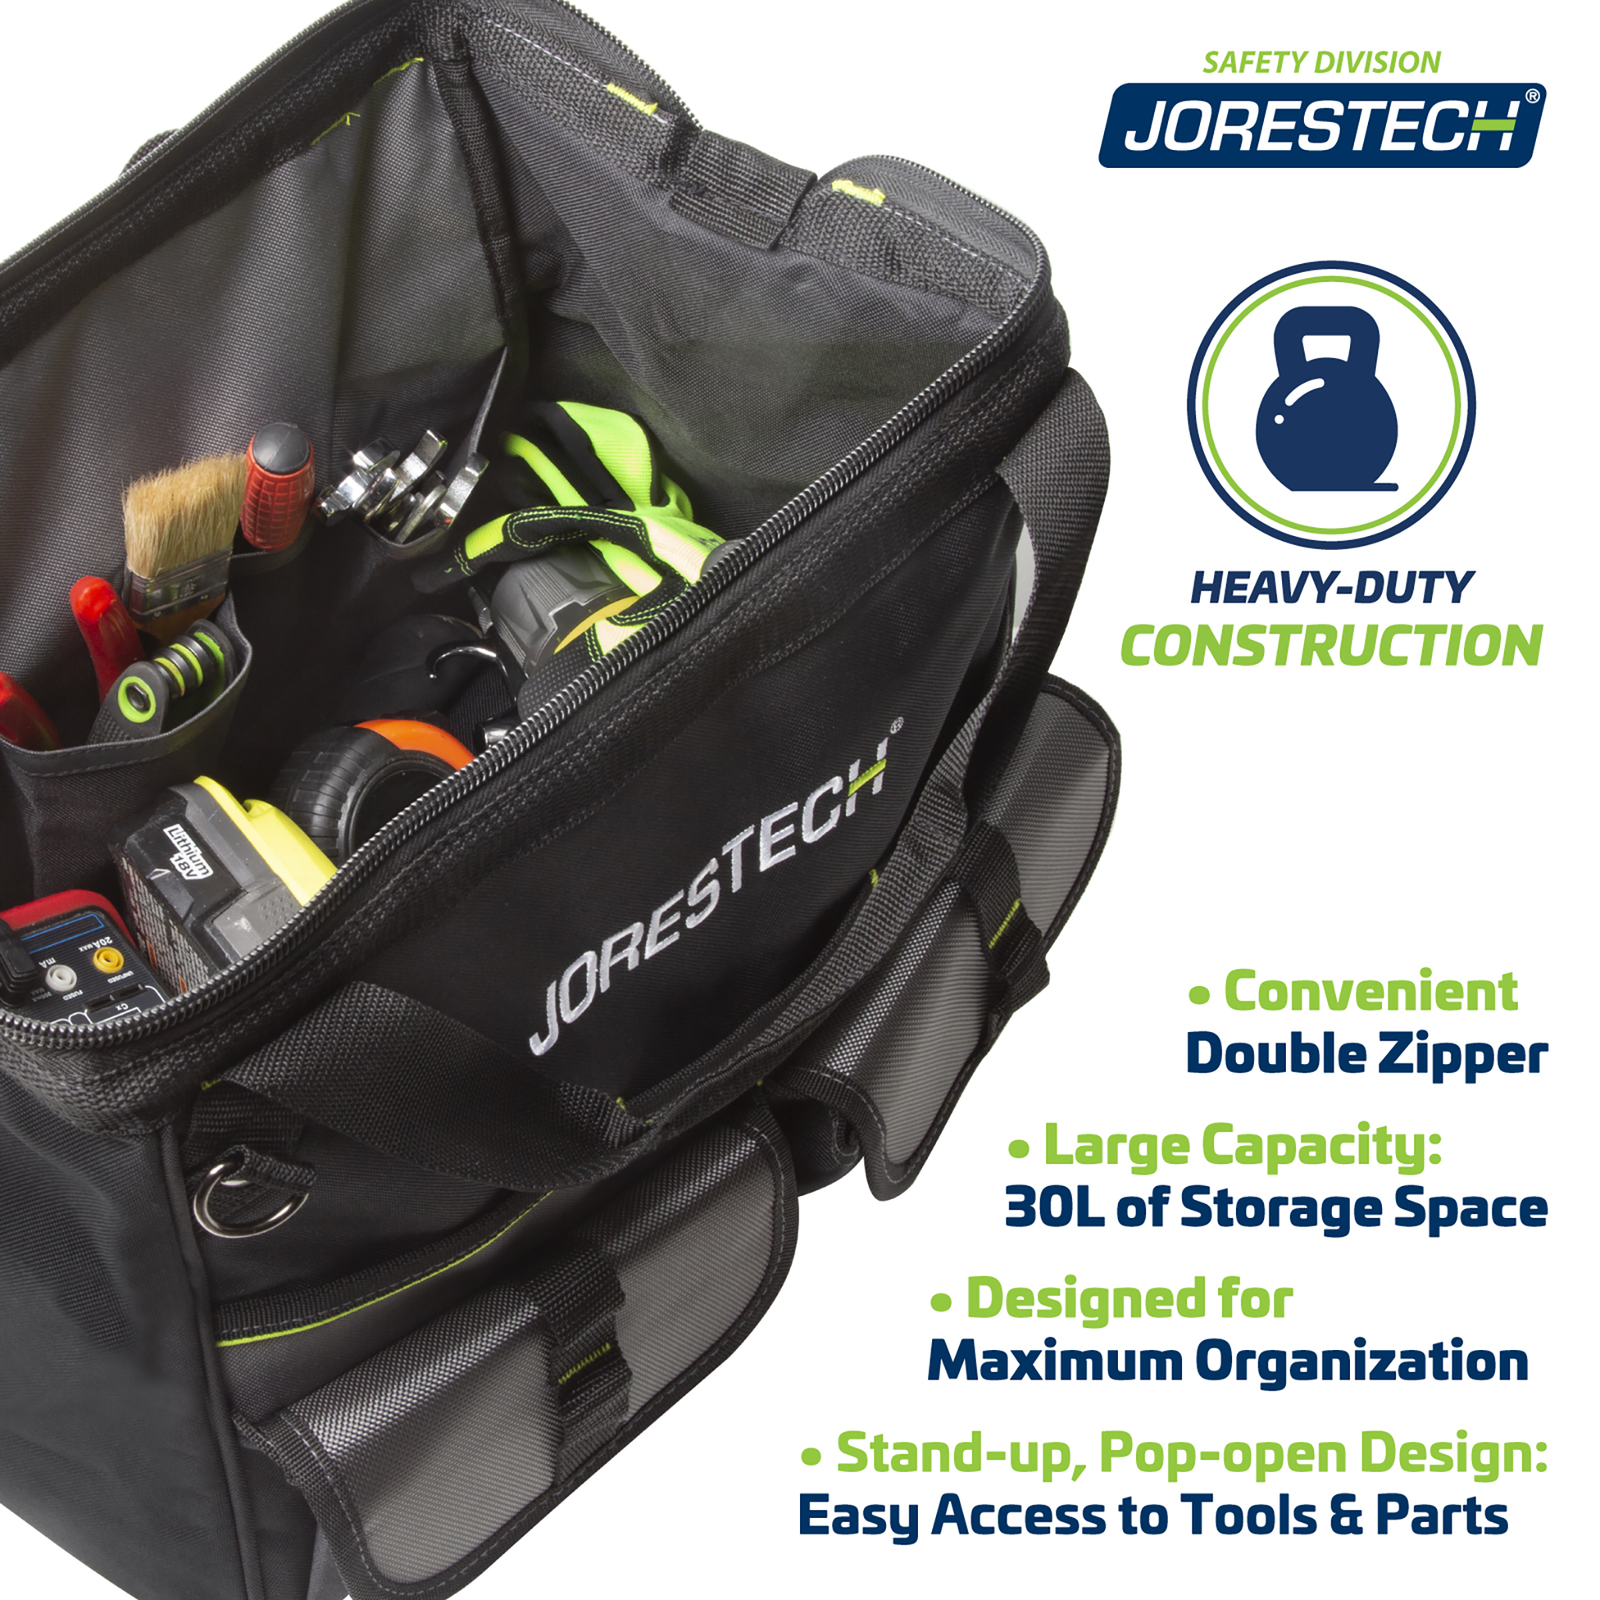 Multipurpose tool bag open filled with tools. Text reads: Heavy duty construction. Convenient double zipper. Large capacity of 30Lbs of storage space. Designed for maximum organization. Stand-up, pop-open design